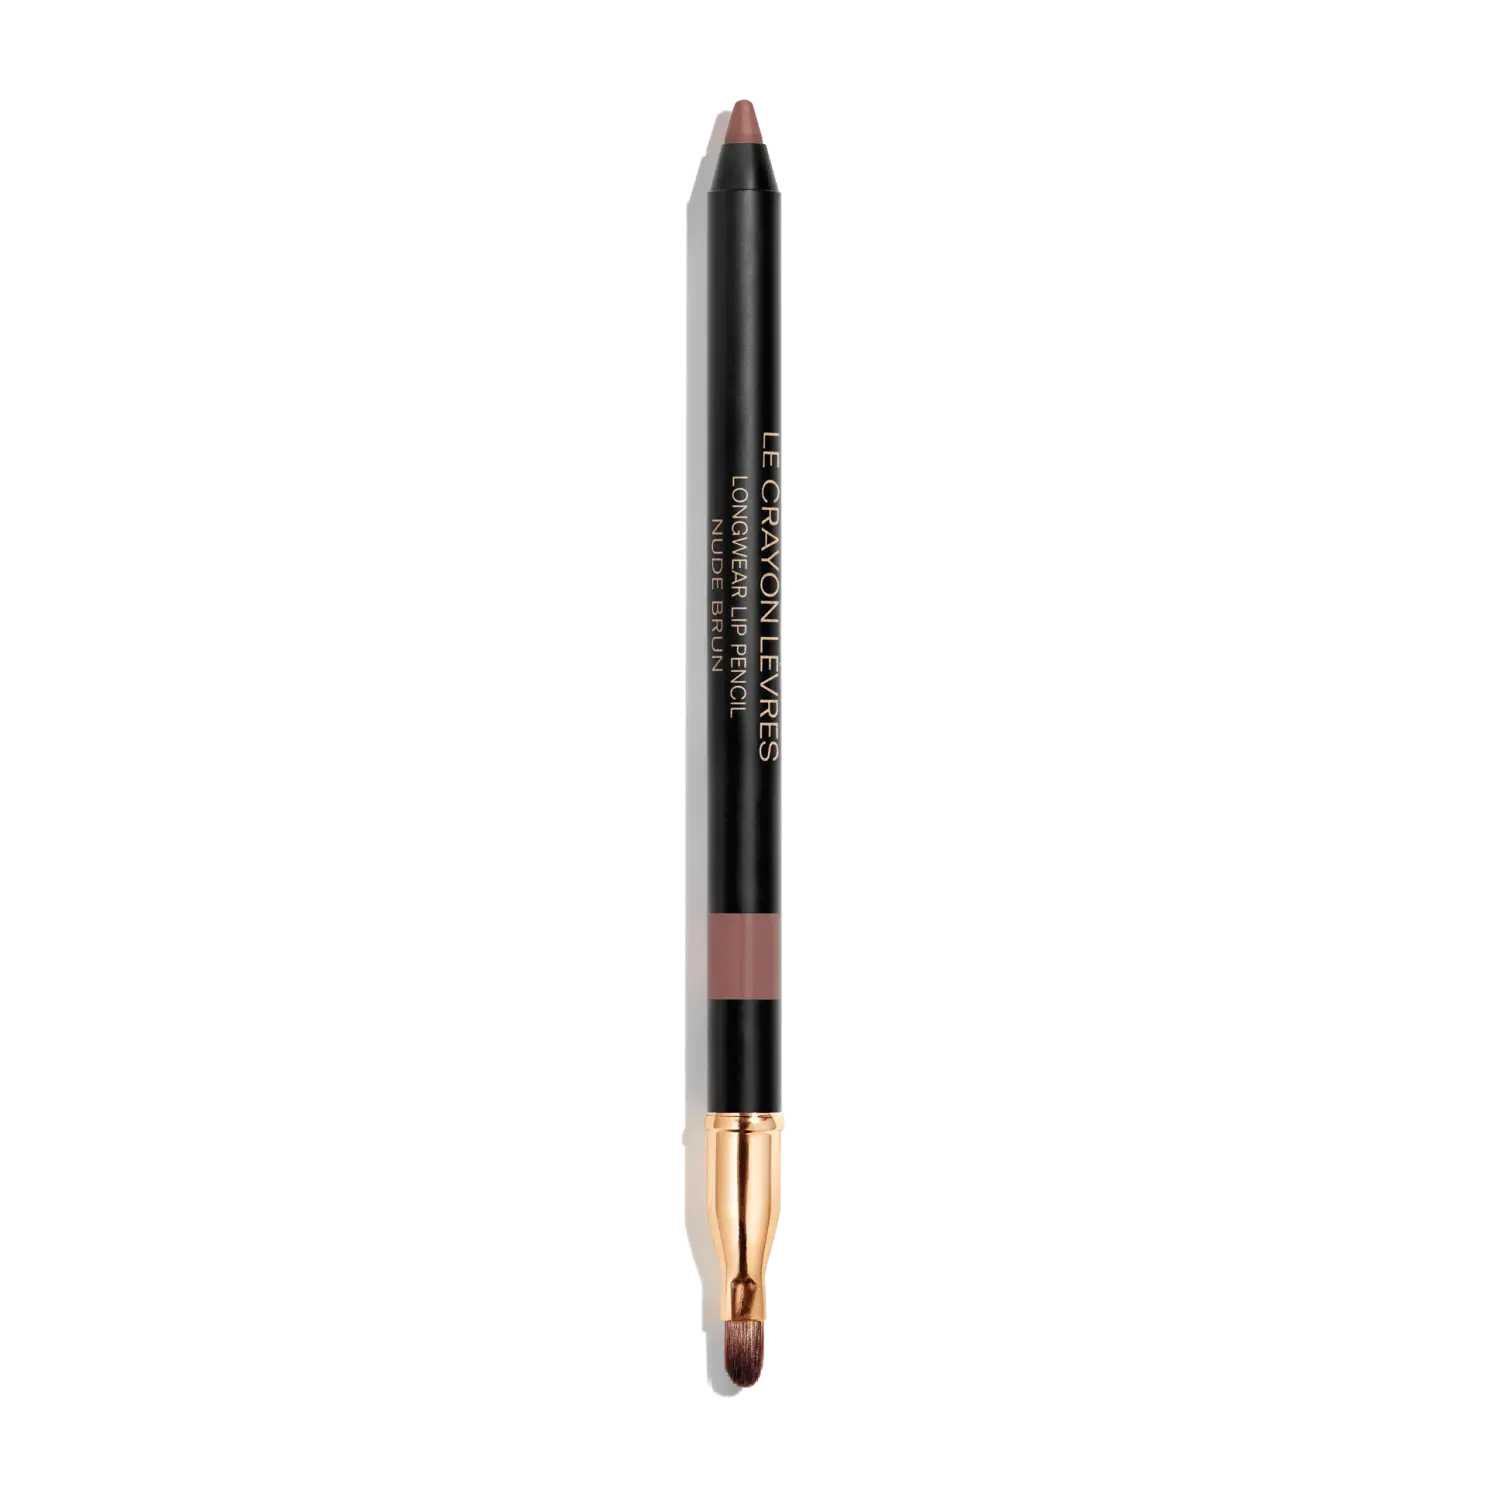 CHANEL LE CRAYON LÈVRES in the shade NUDE BRUN